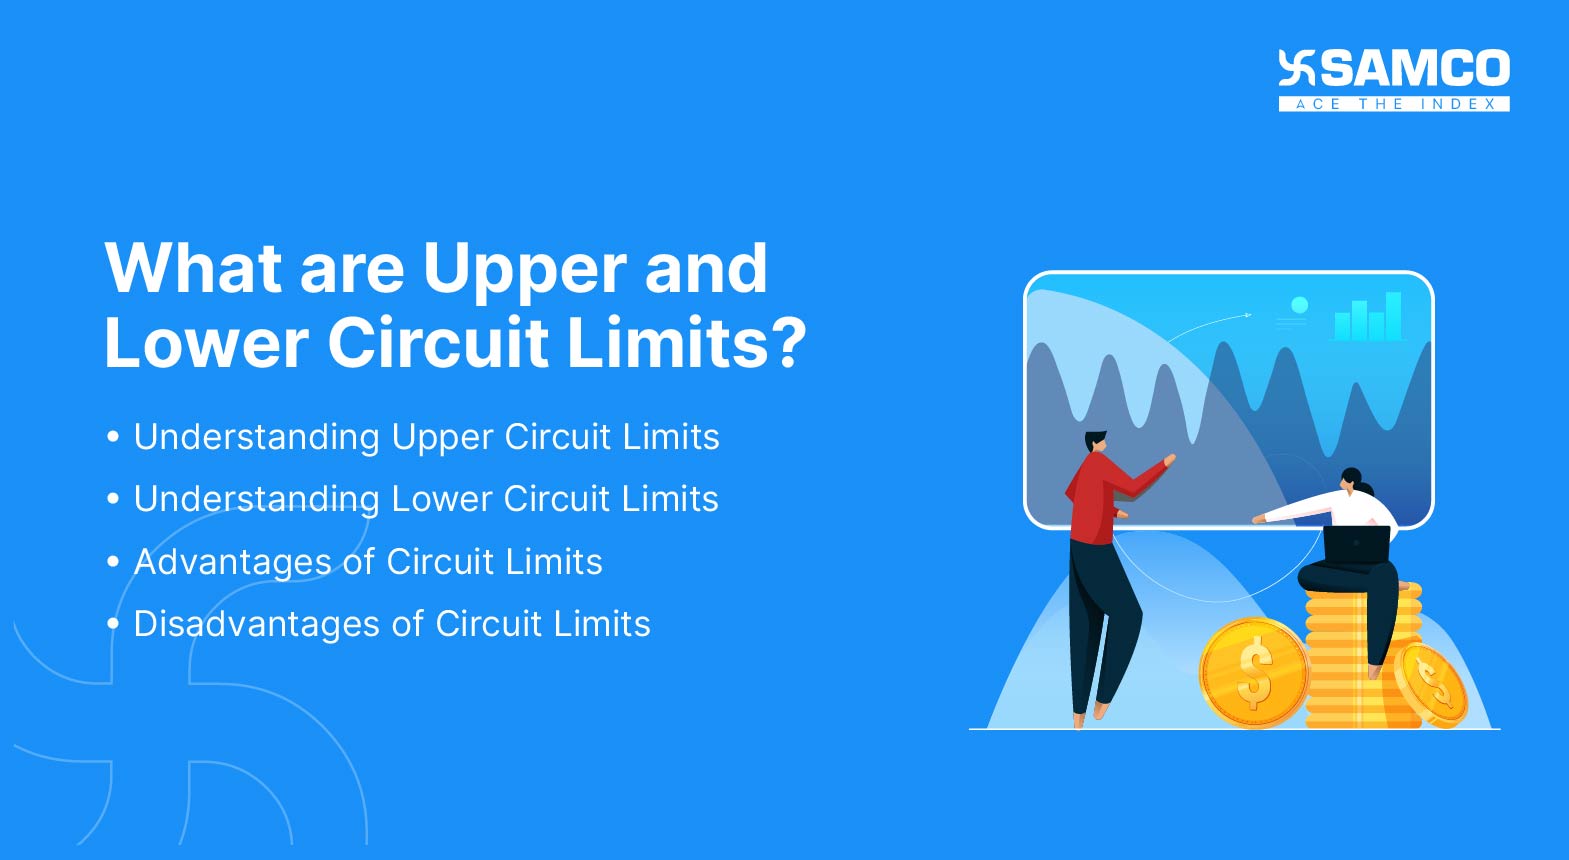 What are Upper and Lower Circuit Limits?